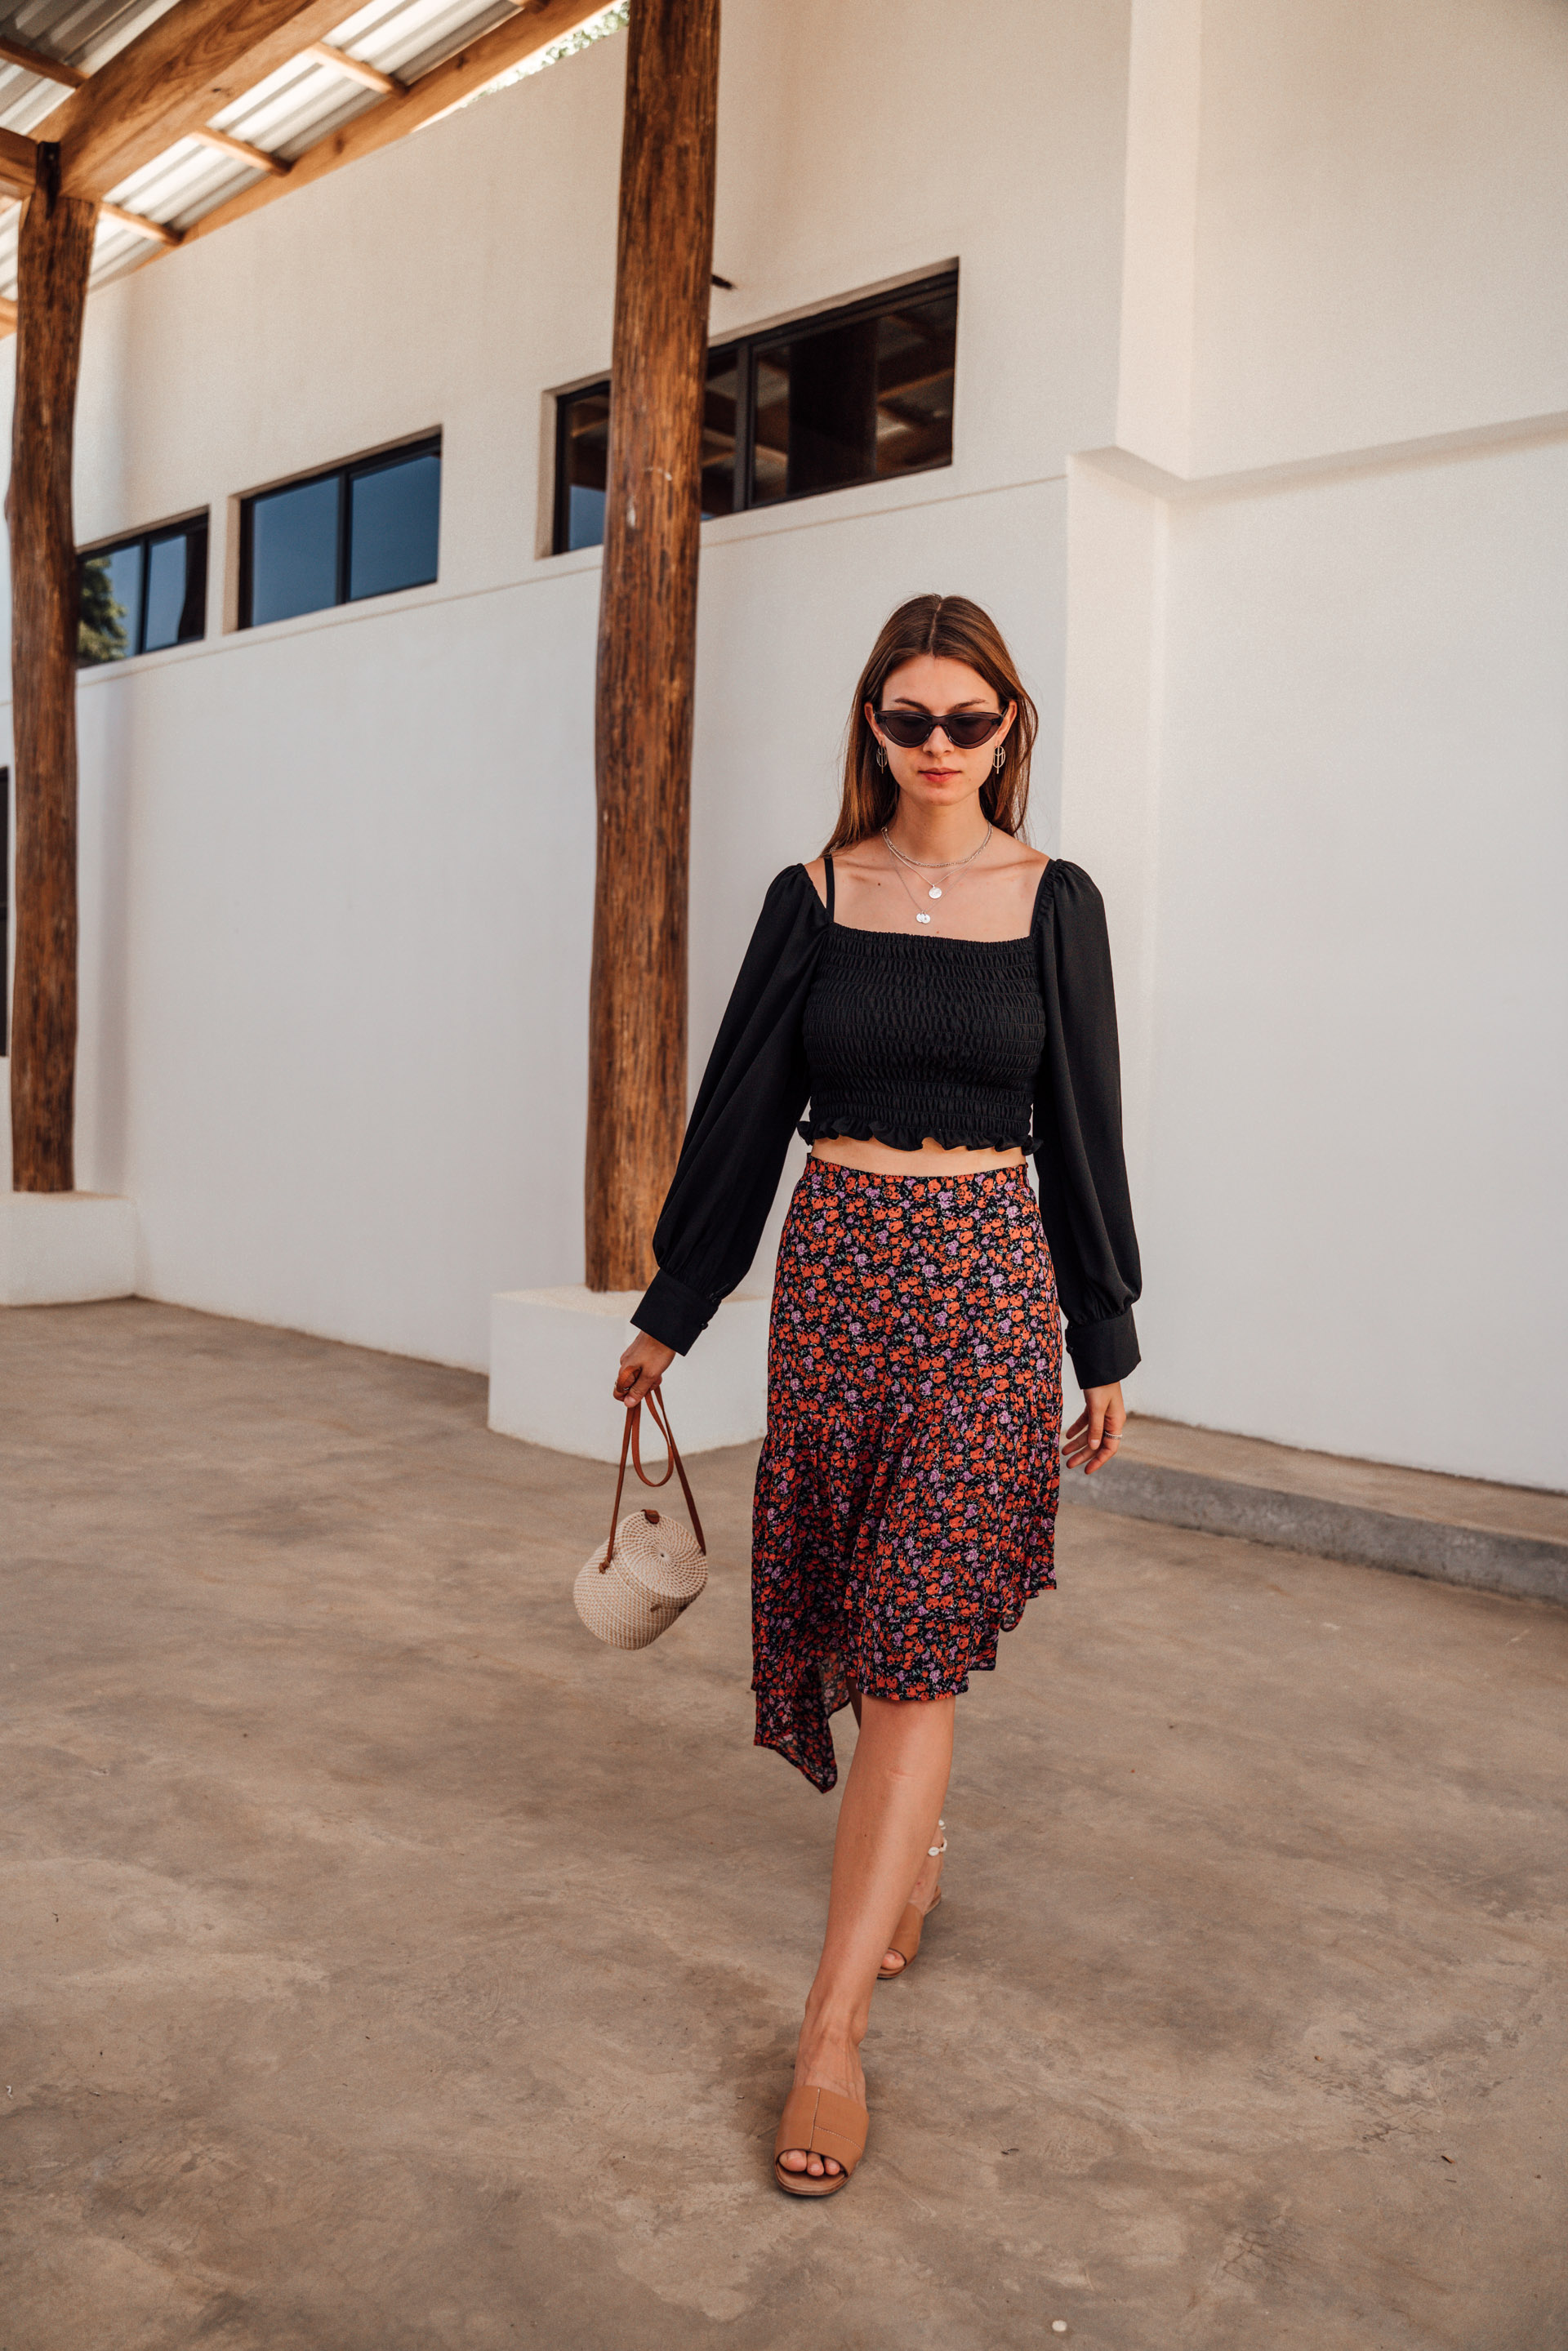 How to wear an asymmetric midi skirt with floral print